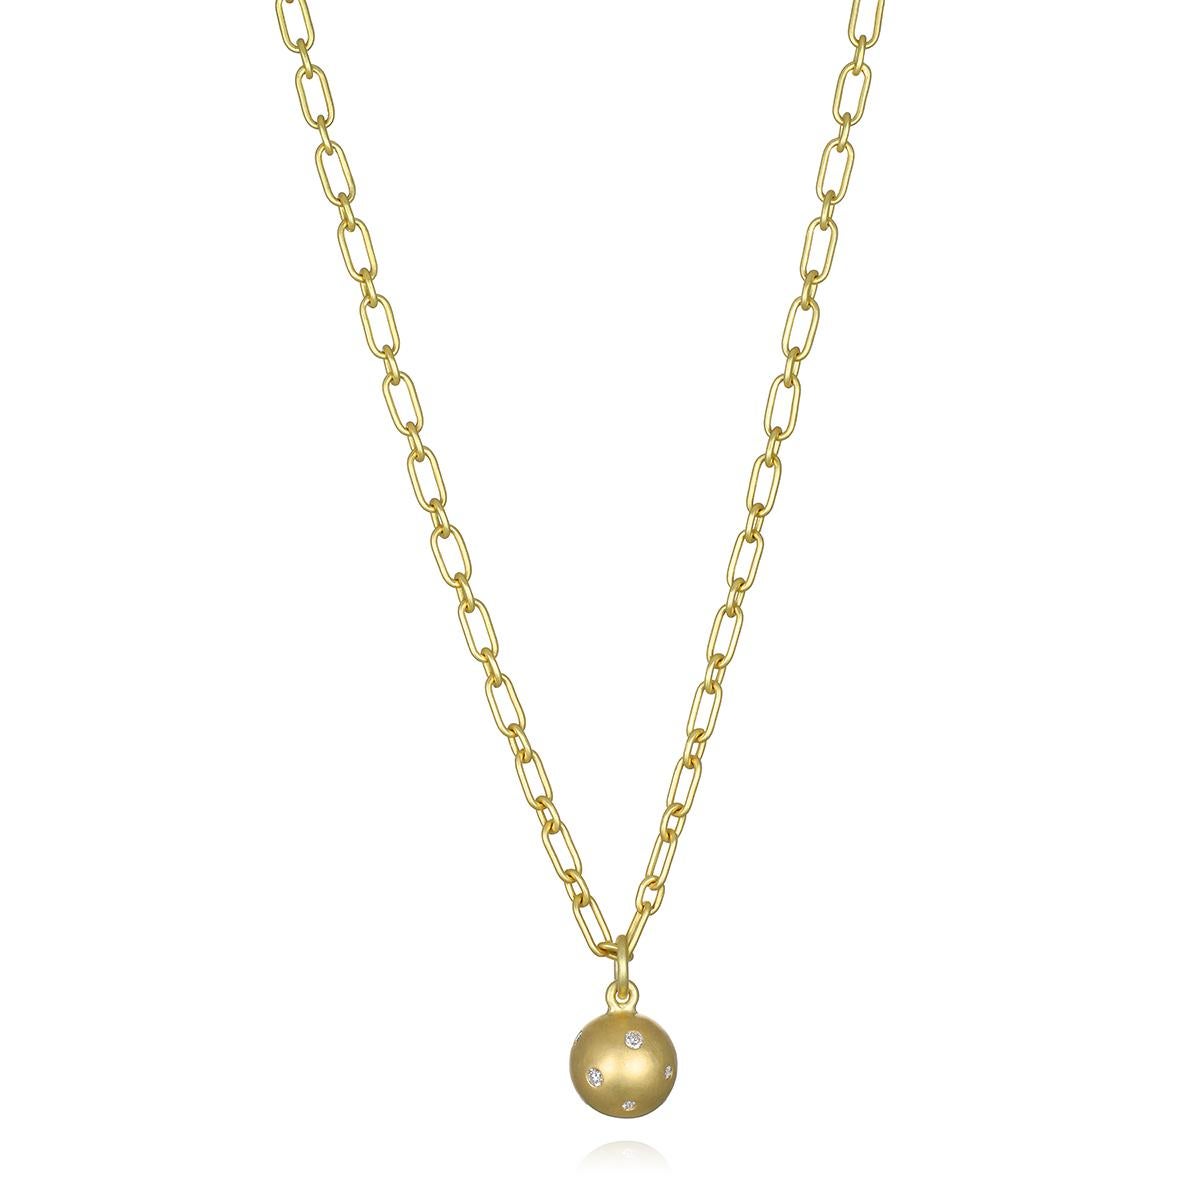 Faye Kim's 18 Karat Gold Burnished Diamond Ball Charm, with its solid gold construction and diamond-studded surface, offers the perfect weight and just the right amount of shine and sparkle. Worn alone or layered with other necklaces and charms,